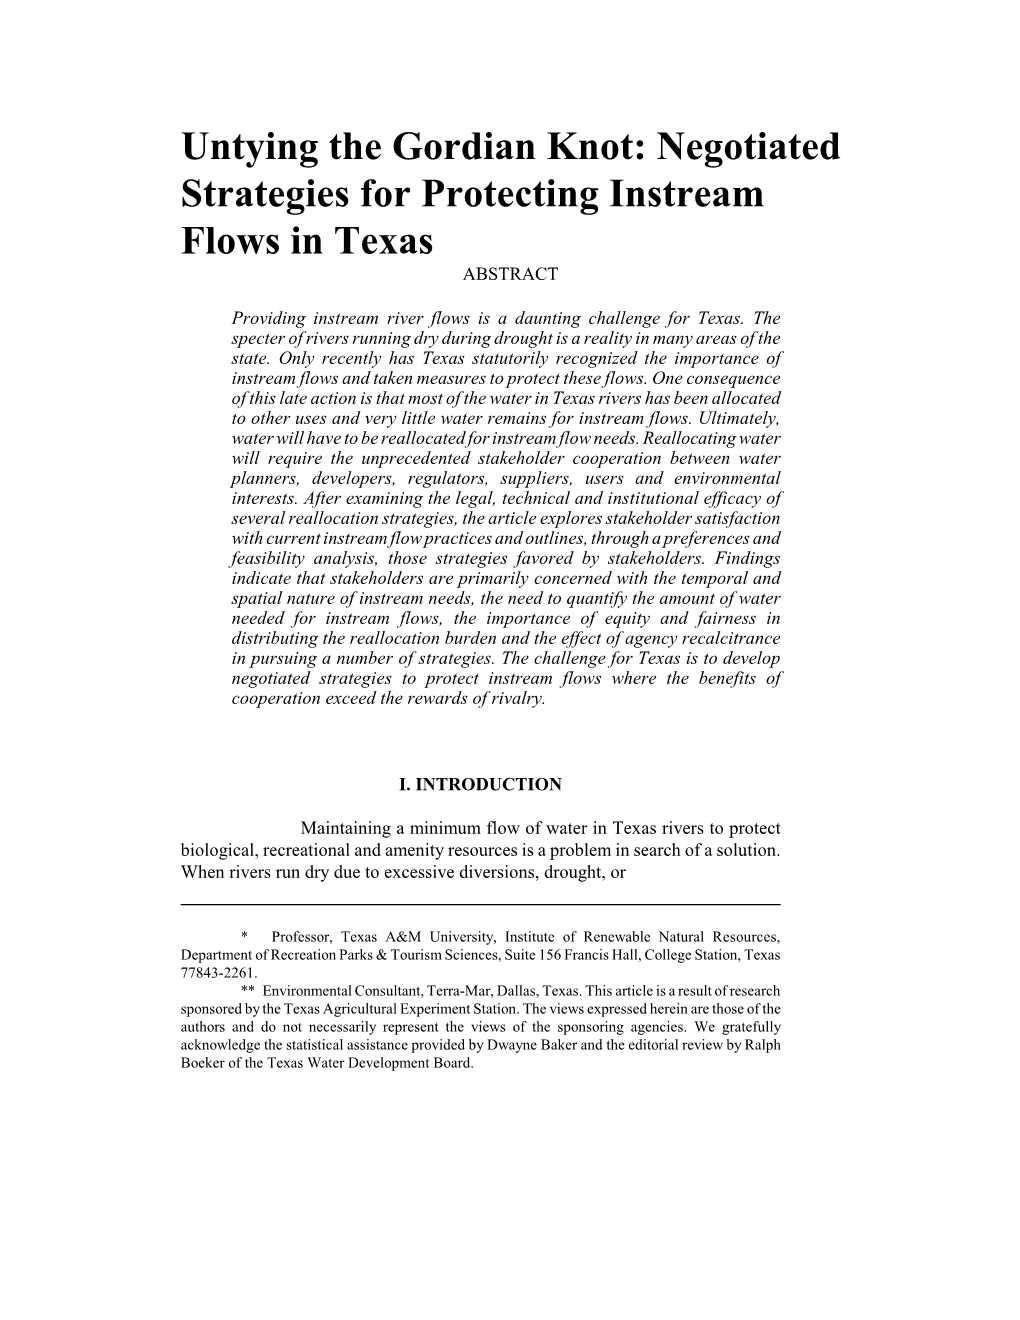 Negotiated Strategies for Protecting Instream Flows in Texas ABSTRACT